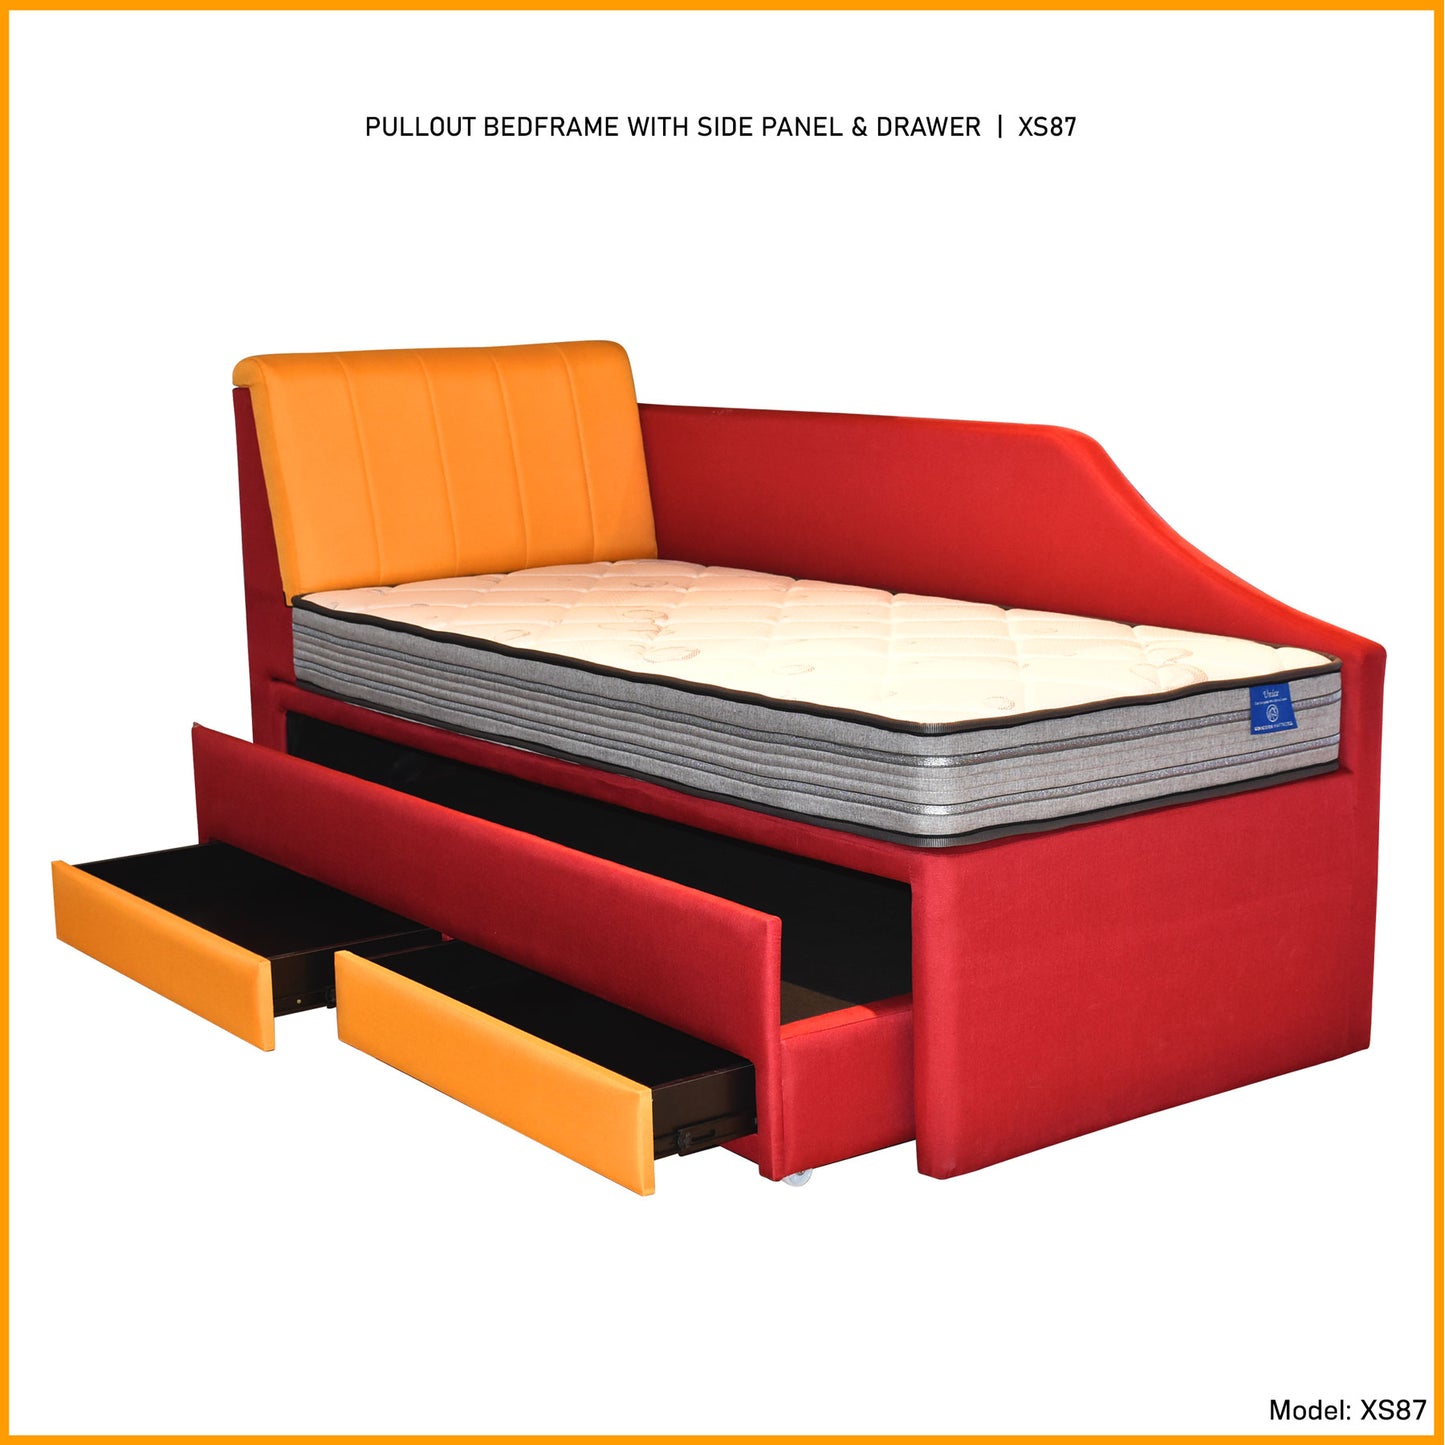 Pullout Bedframe 5in1 with Mattress | MLS87-BESTSELLER